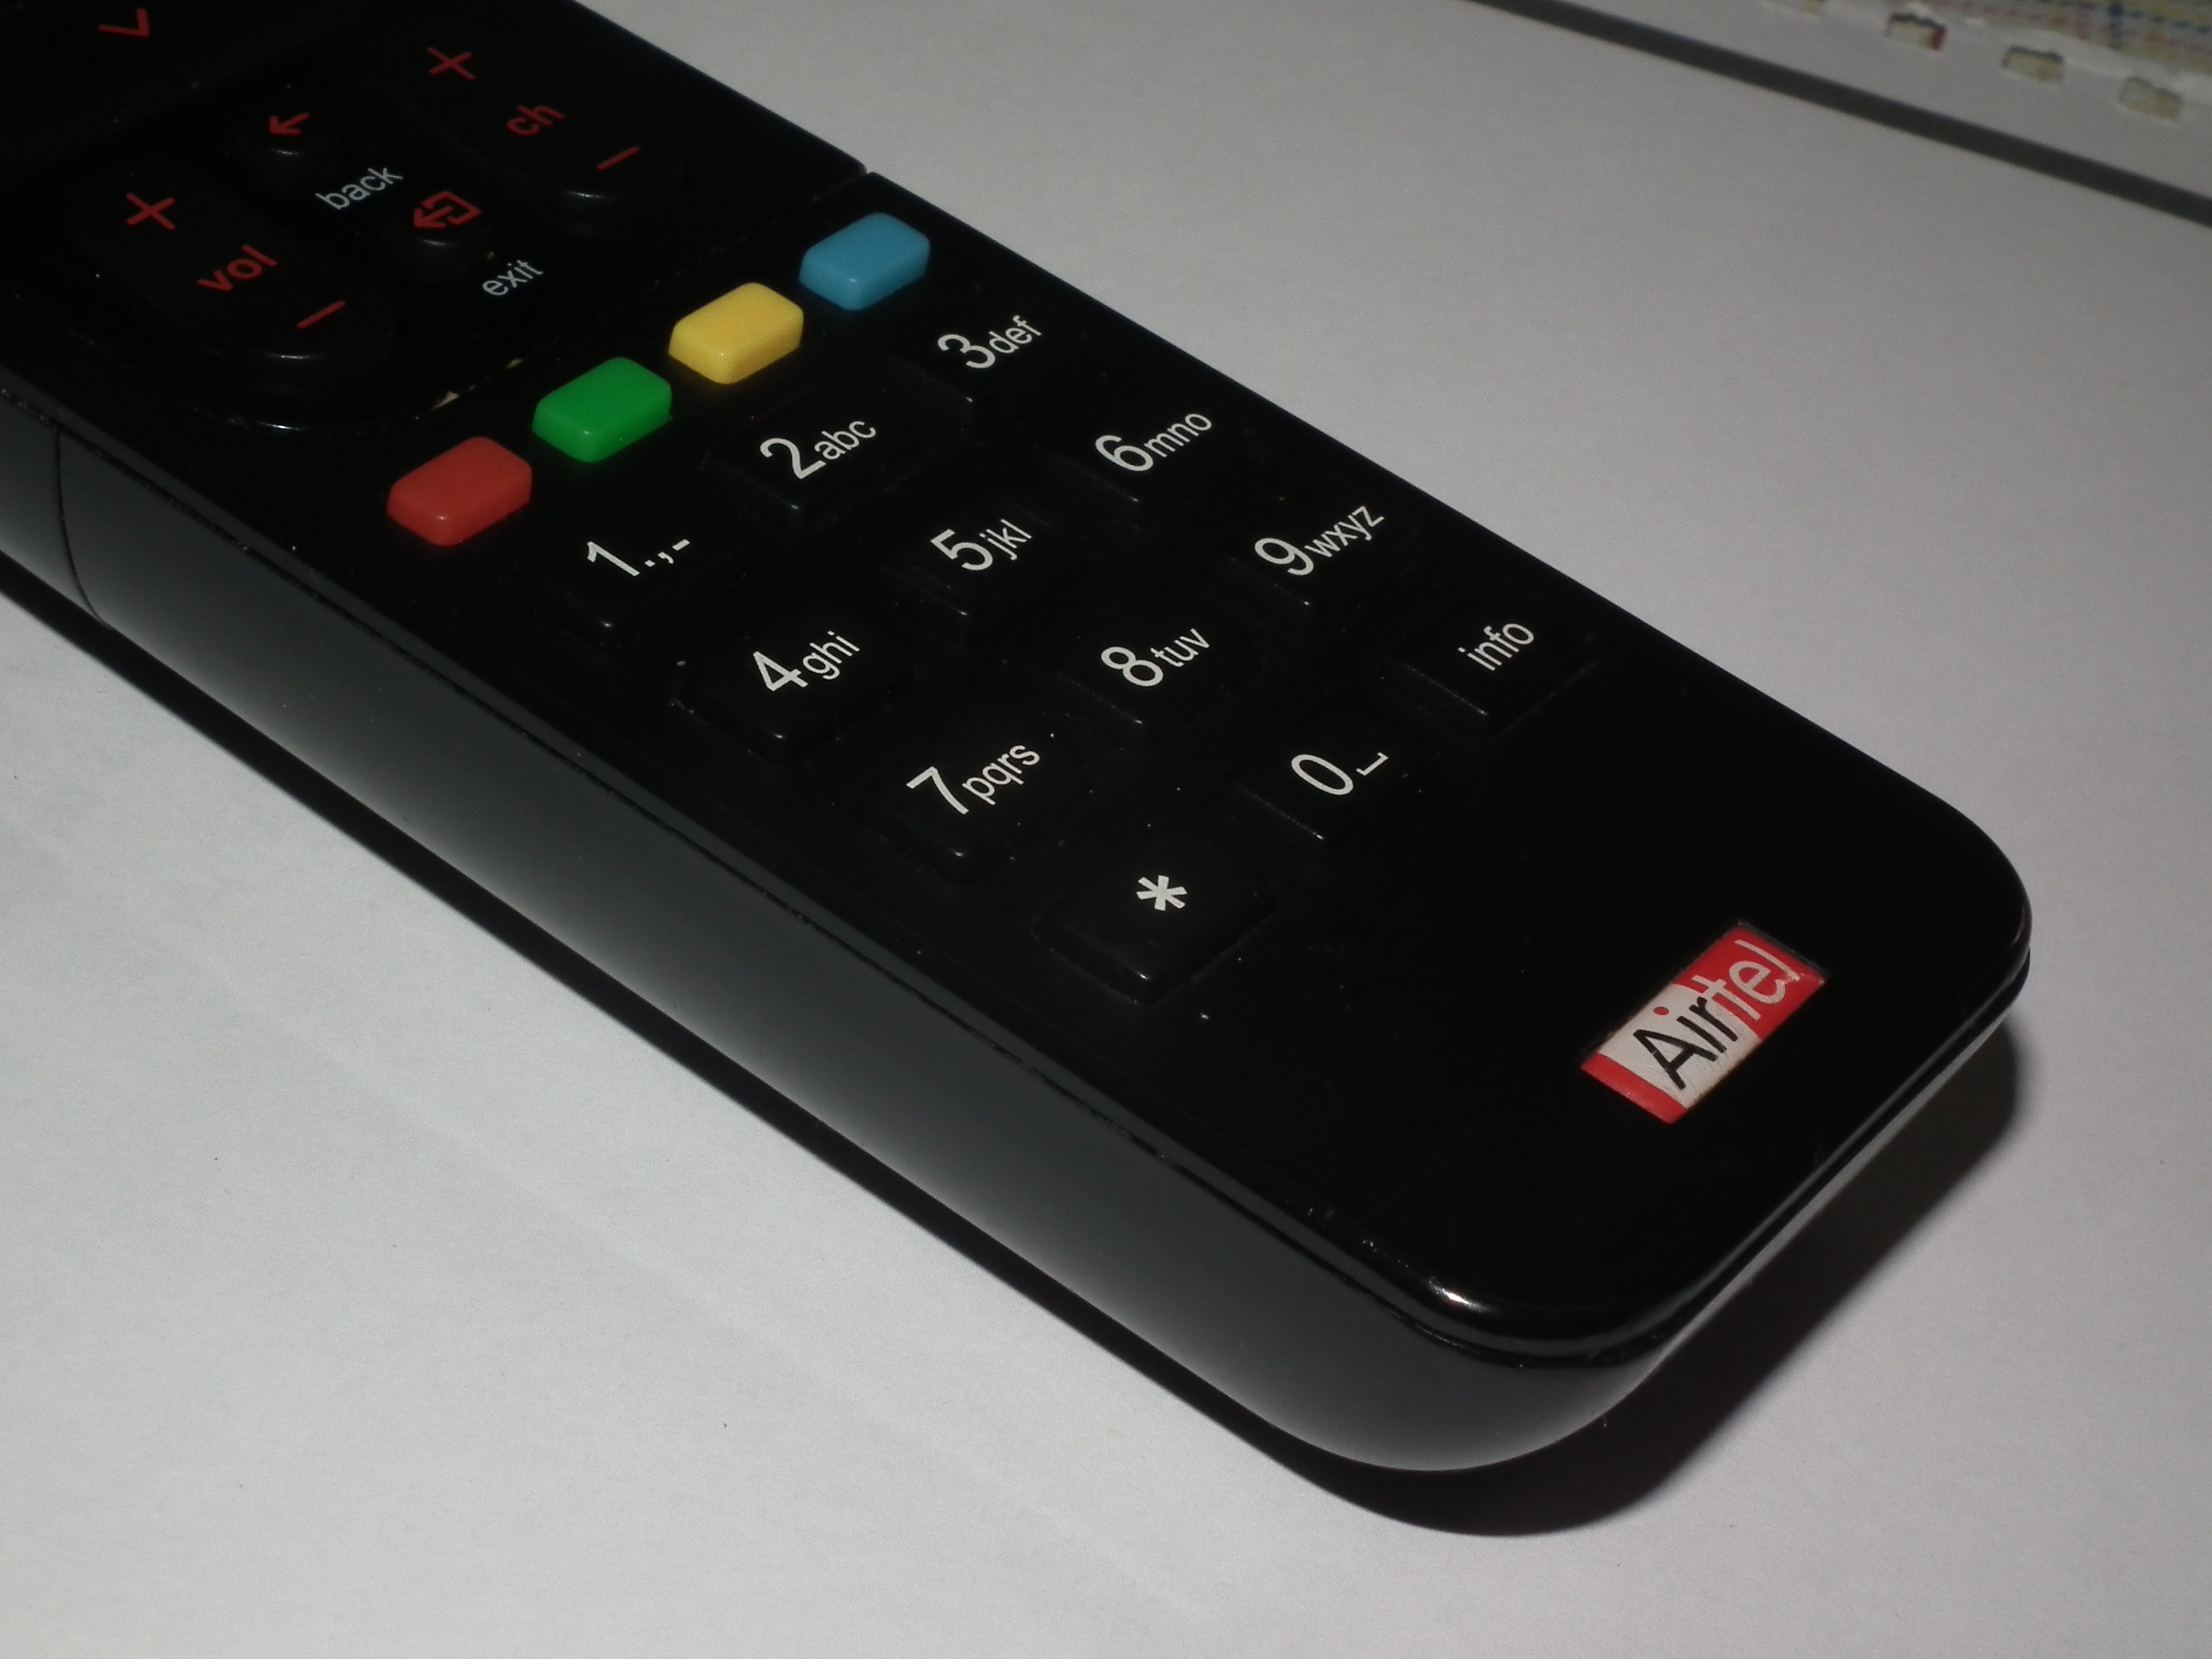 Indian Telco Airtel Digital TV launches SVOD service in Bengali